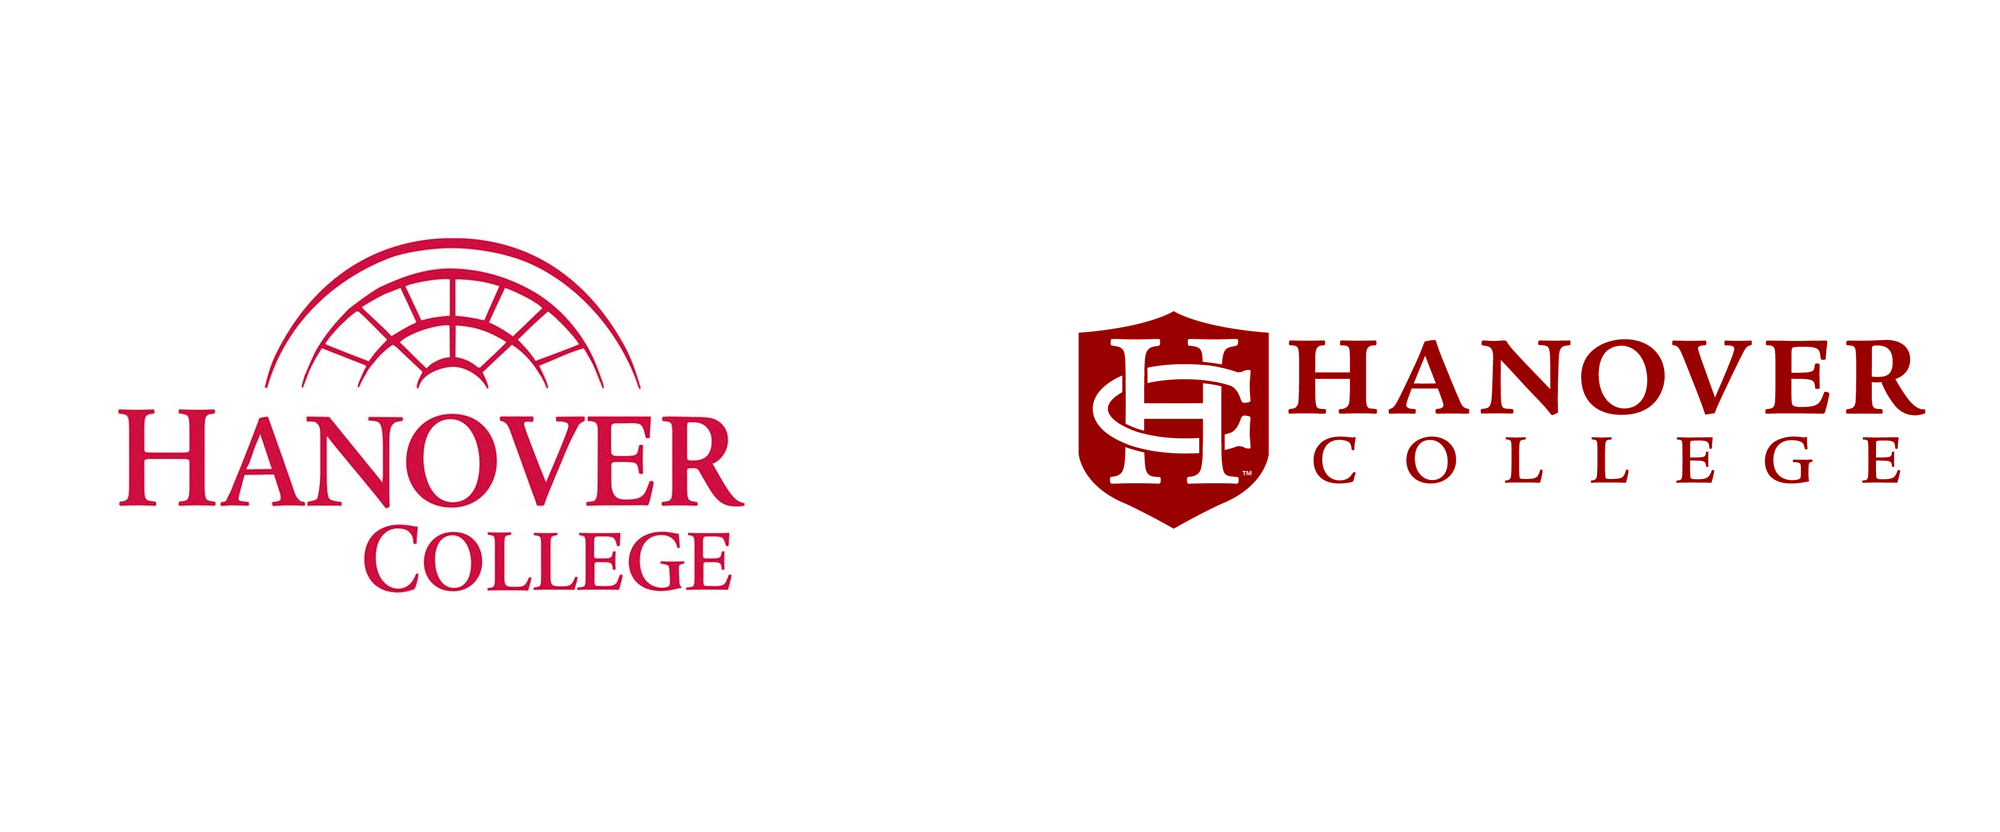 New Logo for Hanover College done In-house